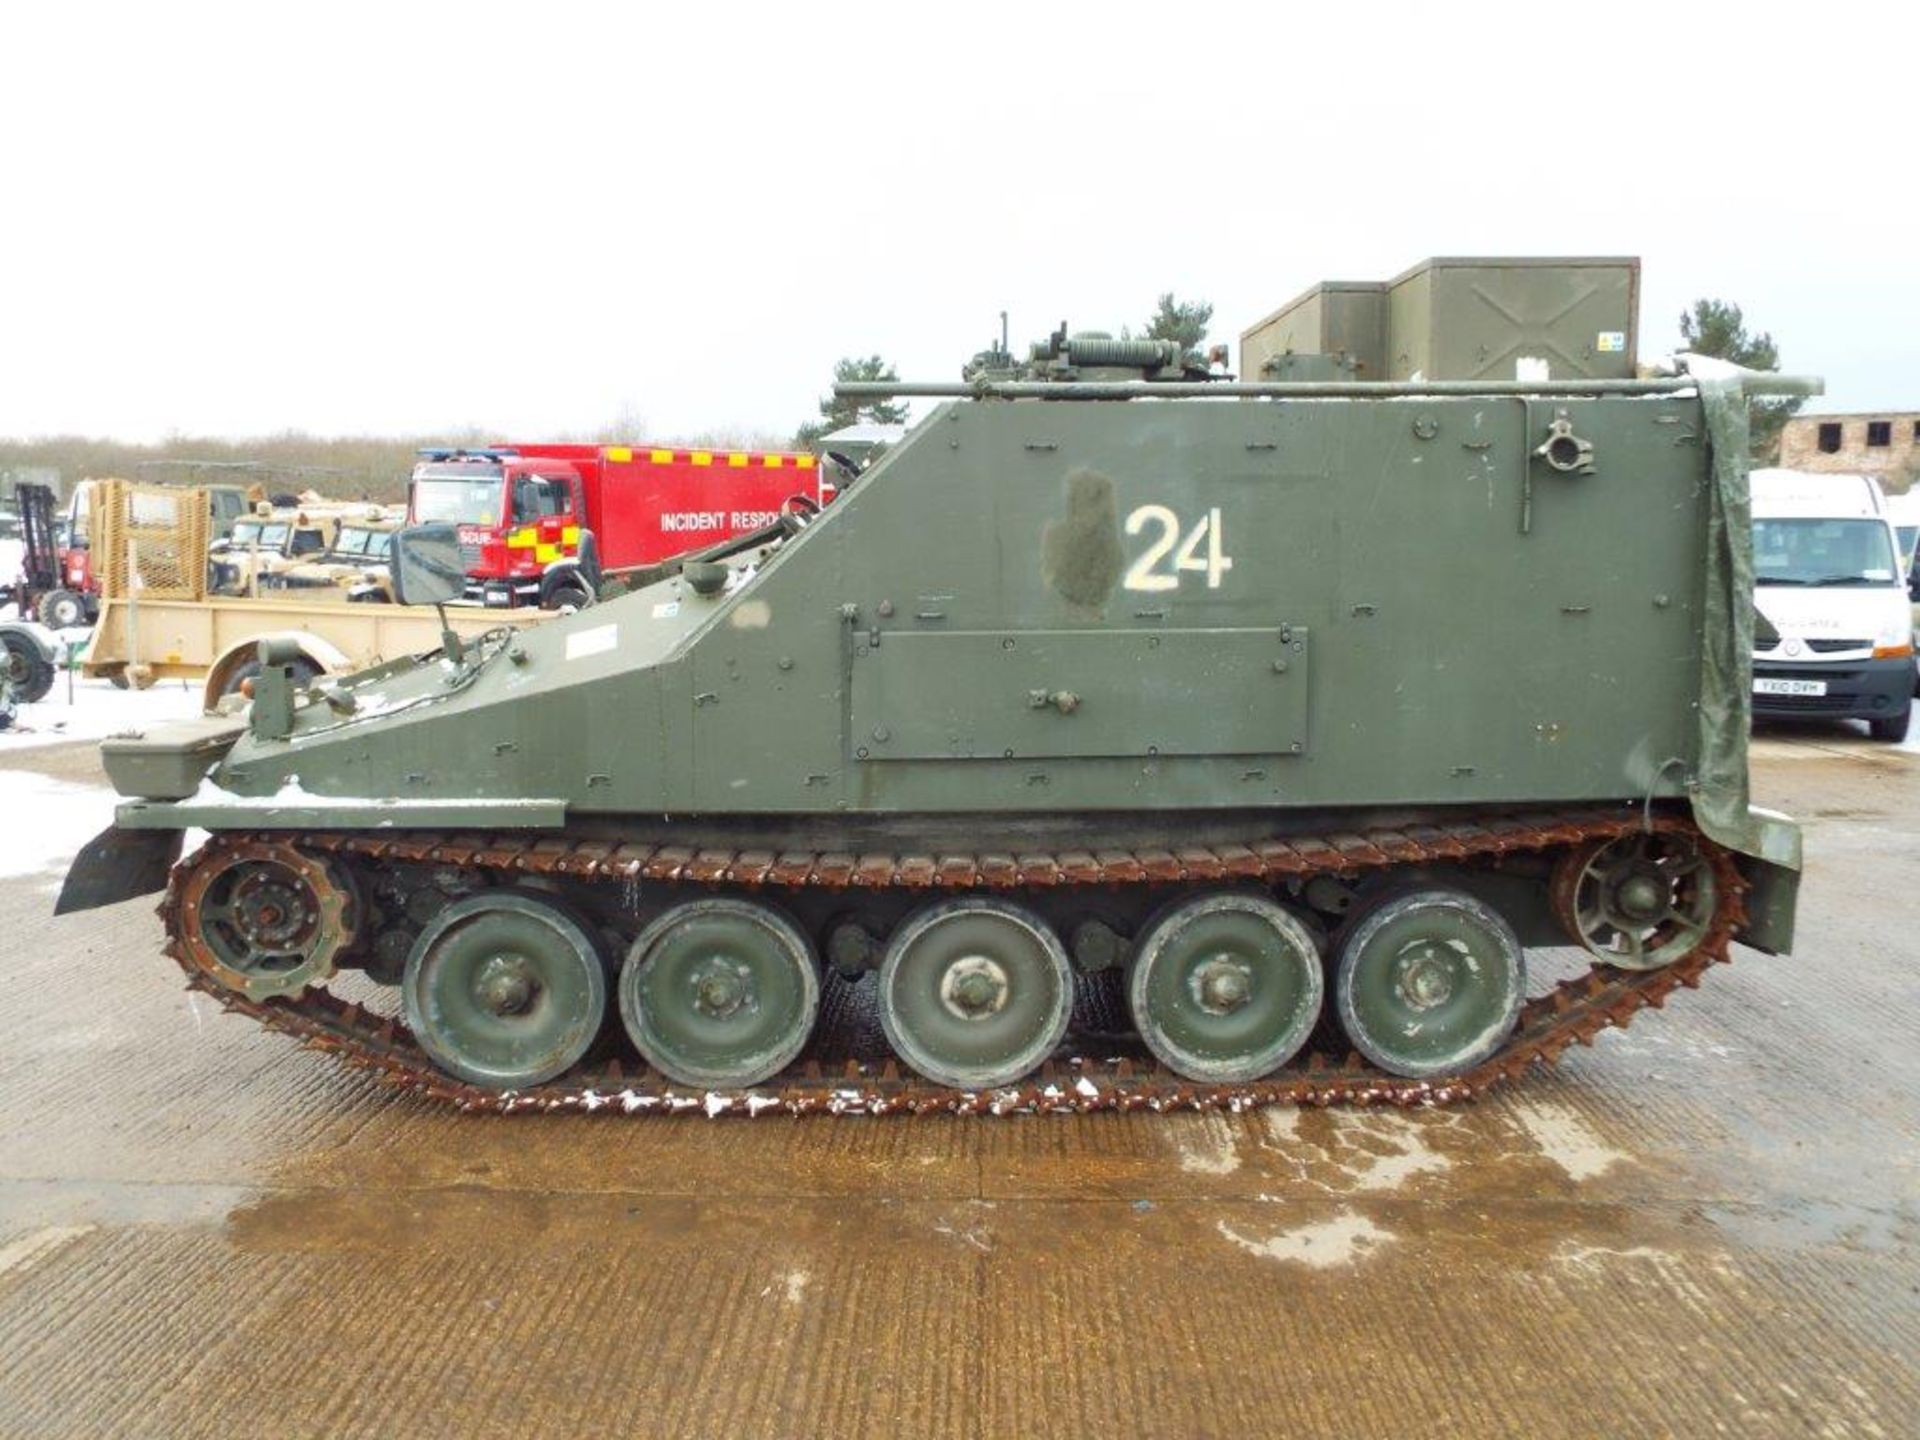 Dieselised CVRT FV105 Sultan Armoured Personnel Carrier with David Brown TN15e Gearbox - Image 4 of 26